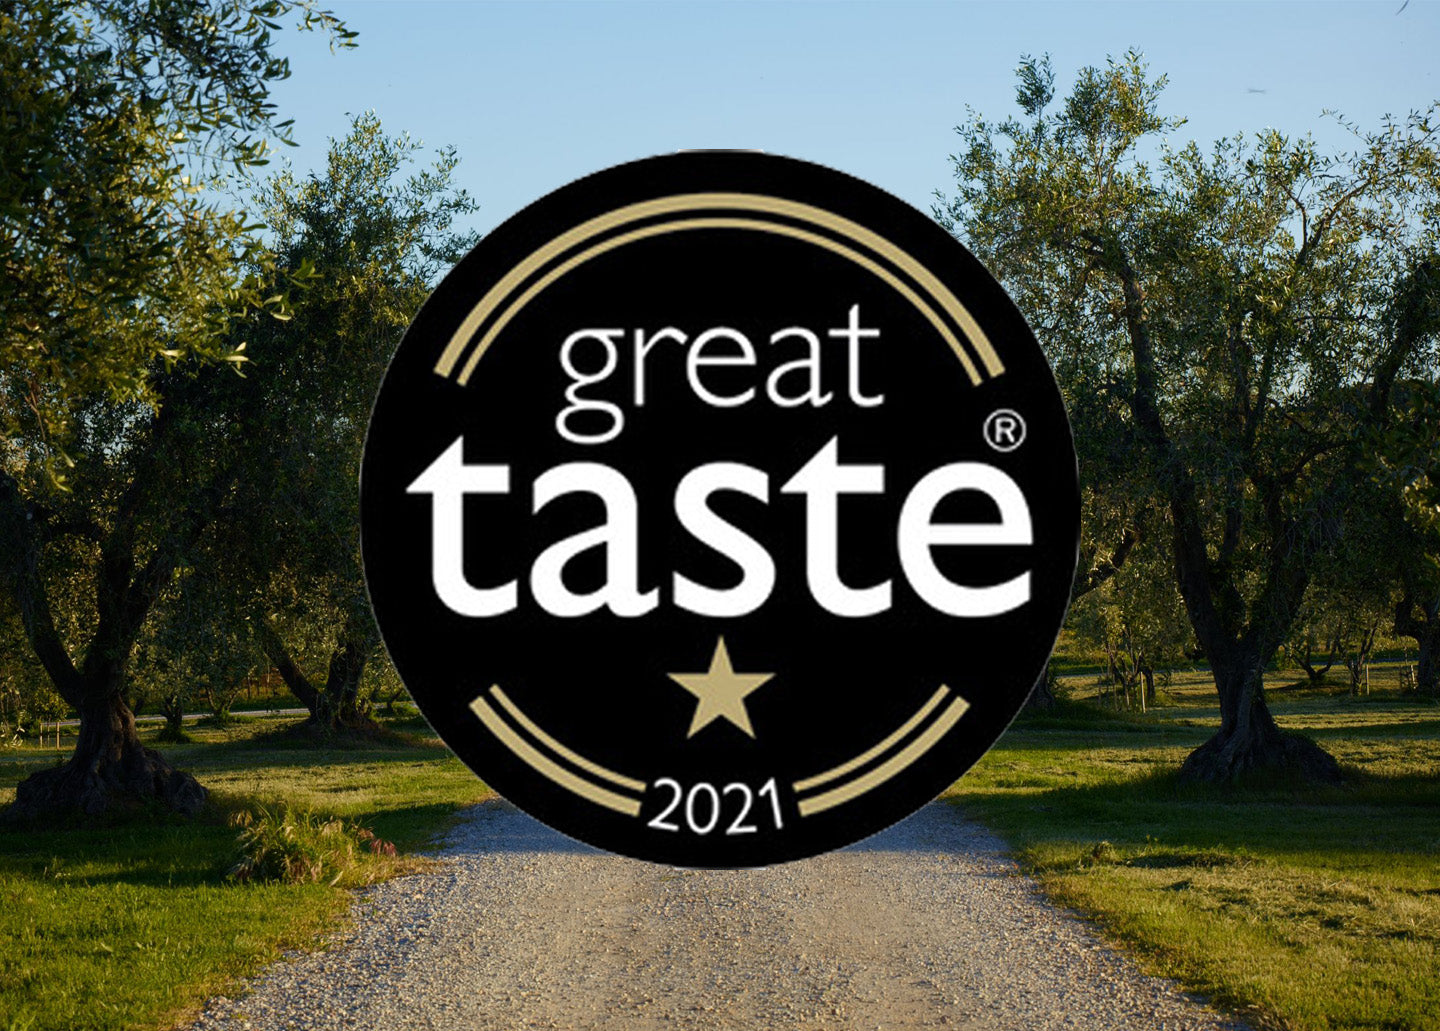 La Bandiera wins another Gold Star at this year's Great Taste Awards